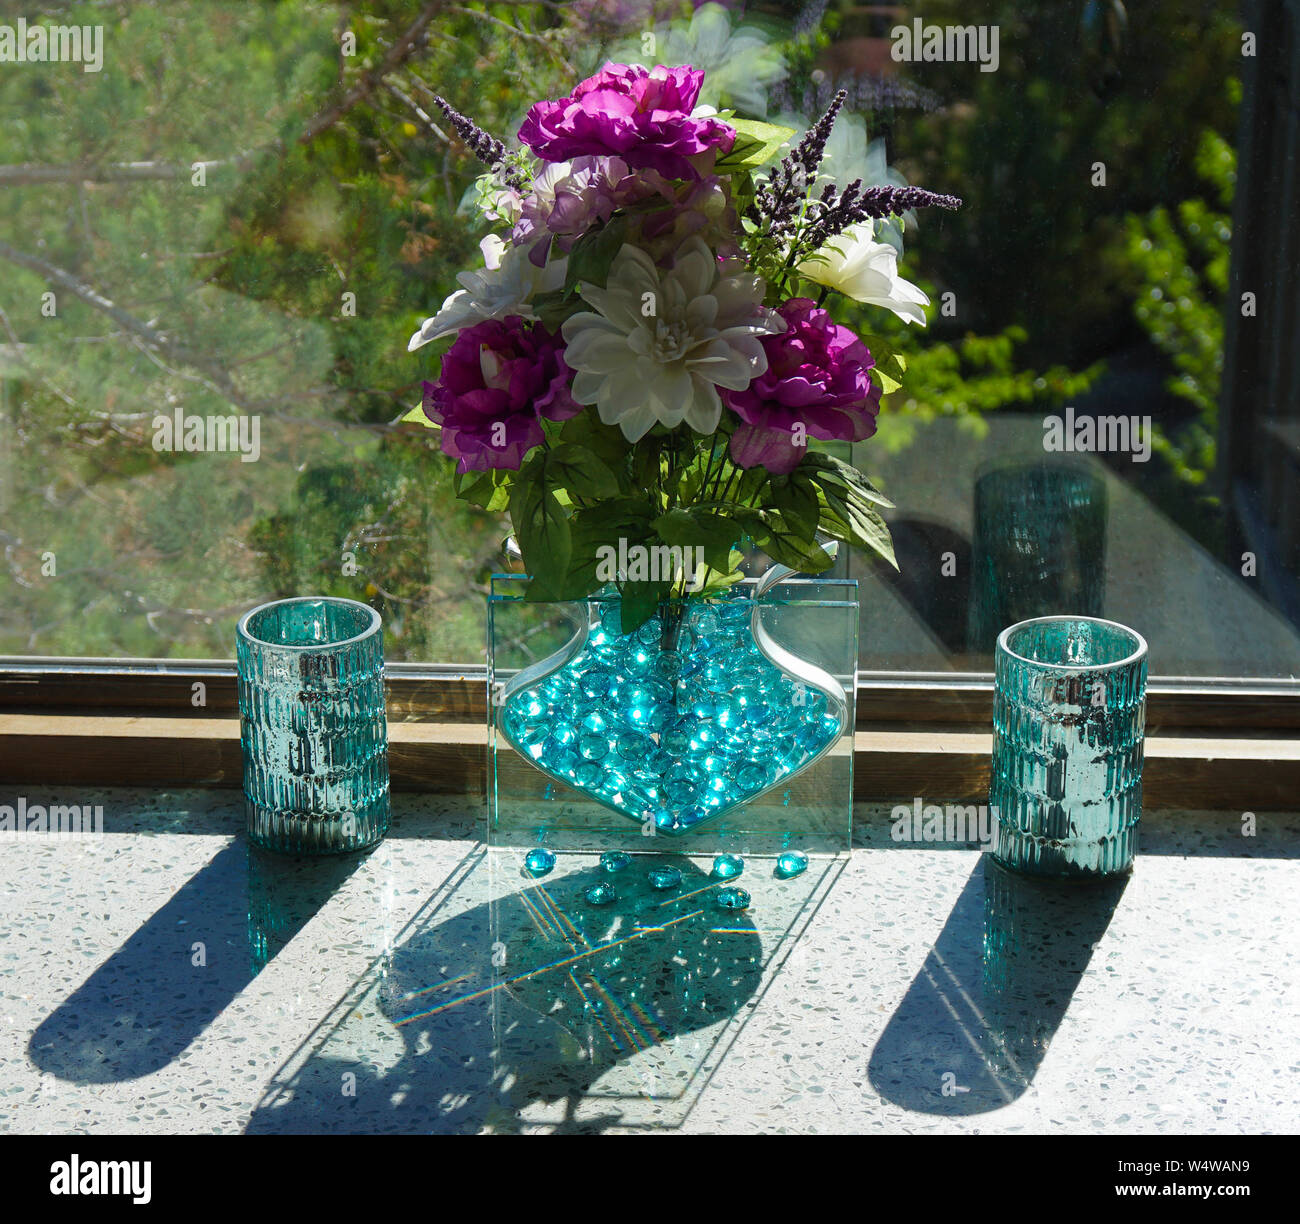 Bouquet of Flowers in a Glass Vase Creates Reflections and Shadows Stock Photo